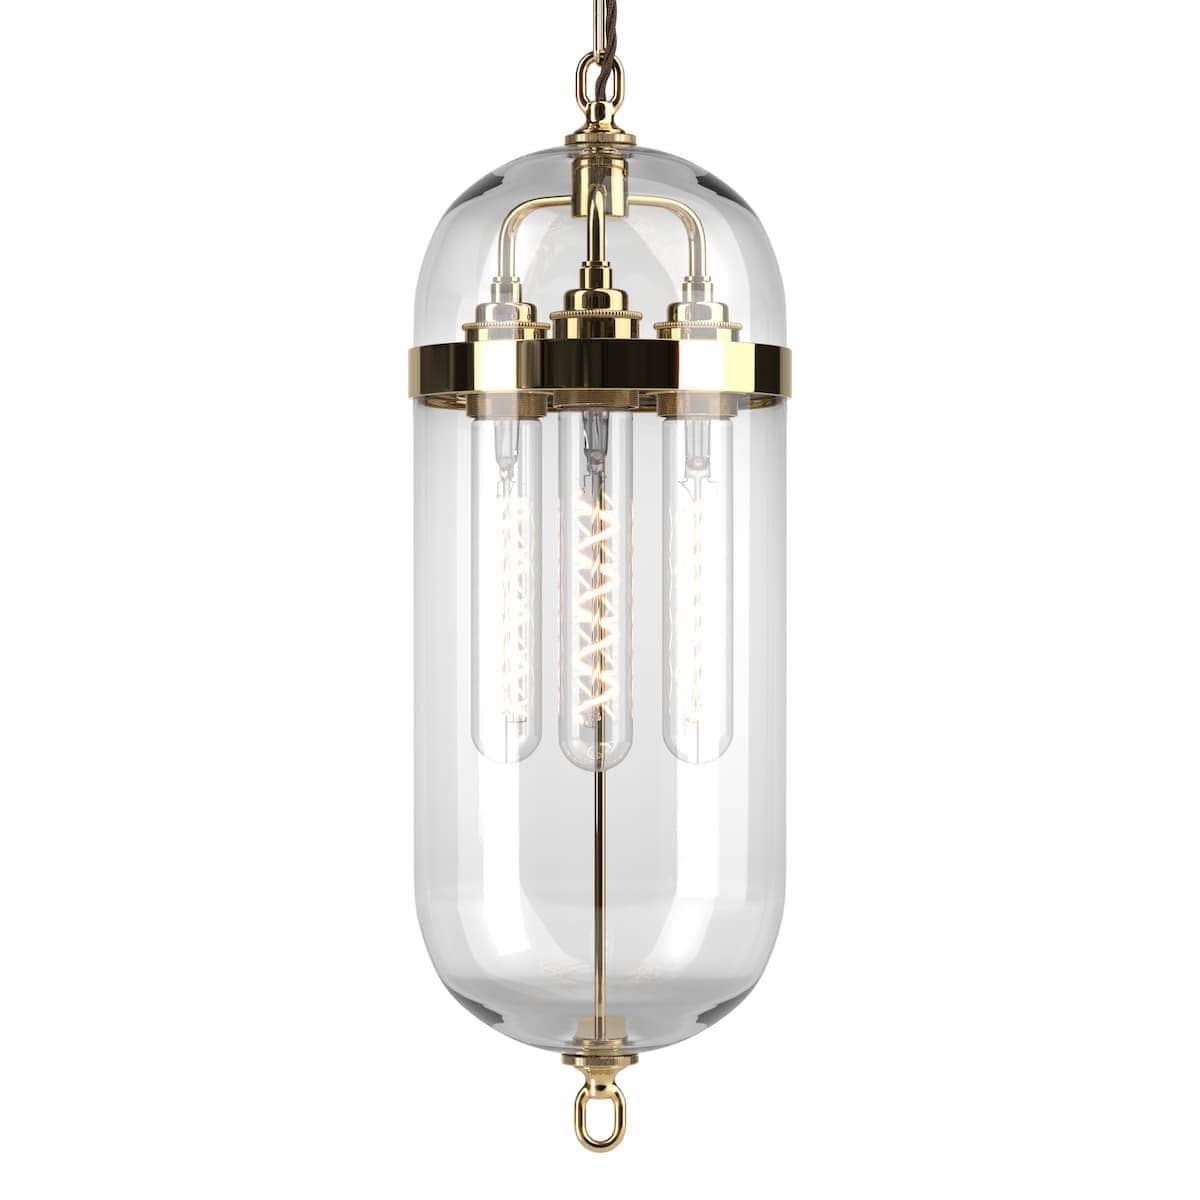 Antique Lantern in Polished Brass by Fritz Fryer for AUTHOR: the home of British-made furniture